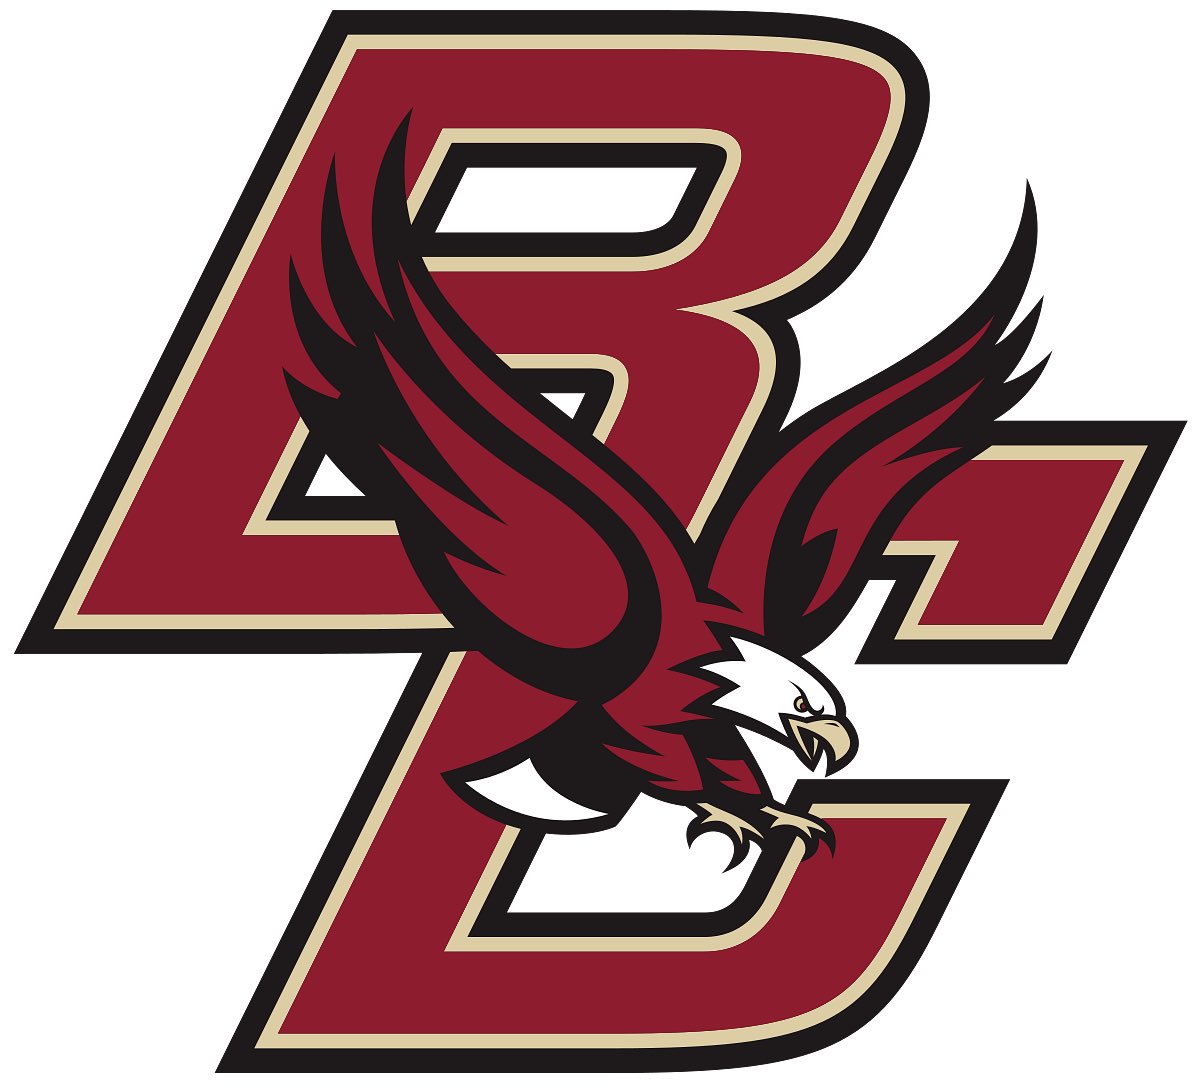 Concluding a great conversation with @CoachPRhoads and @Coach_Applebaum, I am blessed and grateful to receive an offer from Boston College!!